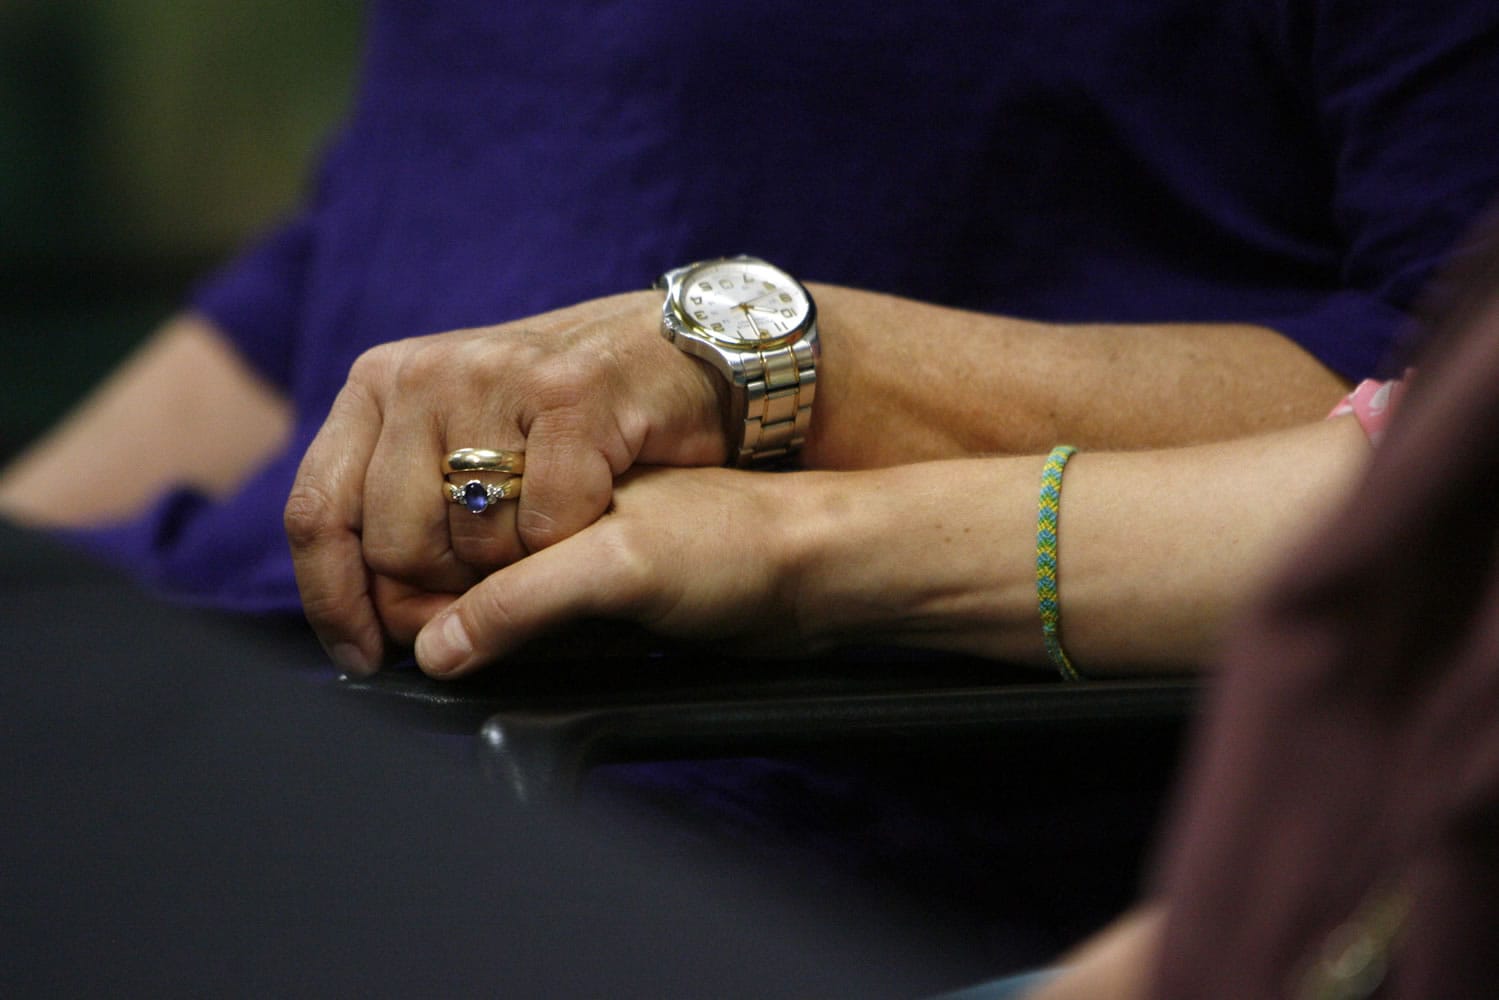 Tara Evans, left, hold the hand of her daughter Karen Evans during a news conference at the McKay-Dee Hospital Center in Ogden, Utah, on Monday to update the condition of Tara's husband, James Evans, who was shot in the head during church services on Sunday.